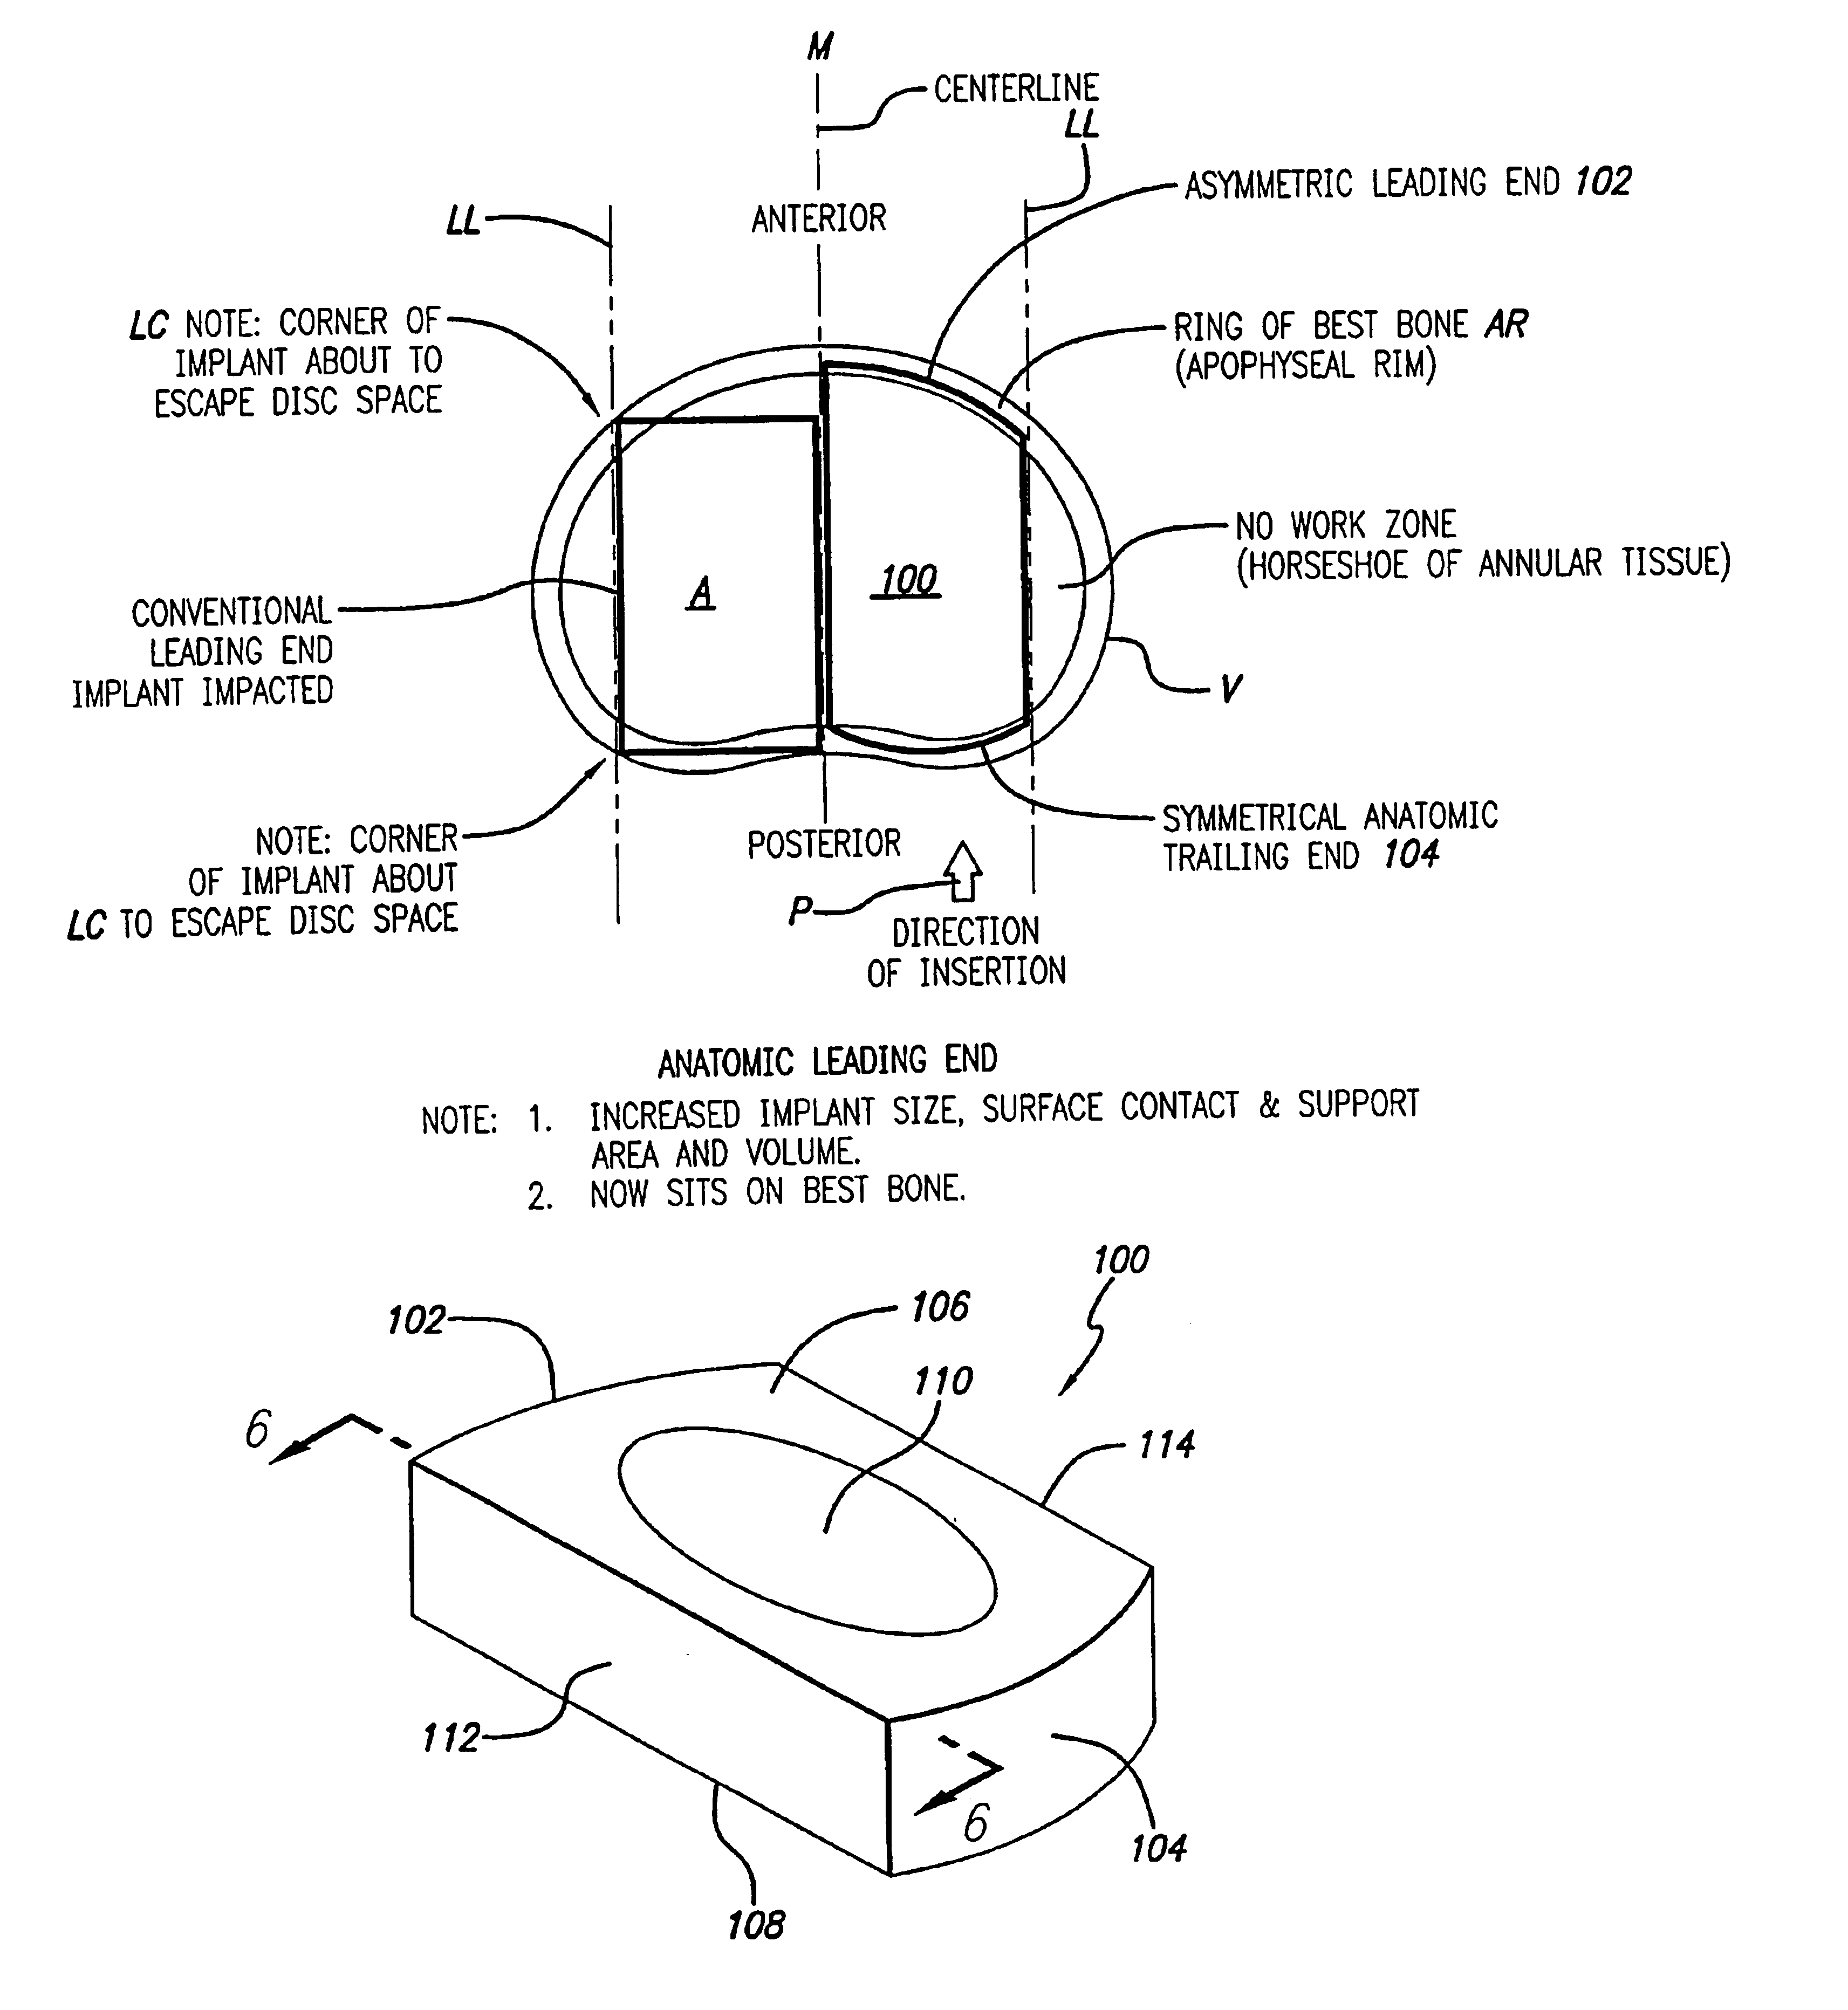 Bone hemi-lumbar interbody spinal fusion implant having an asymmetrical leading end and method of installation thereof